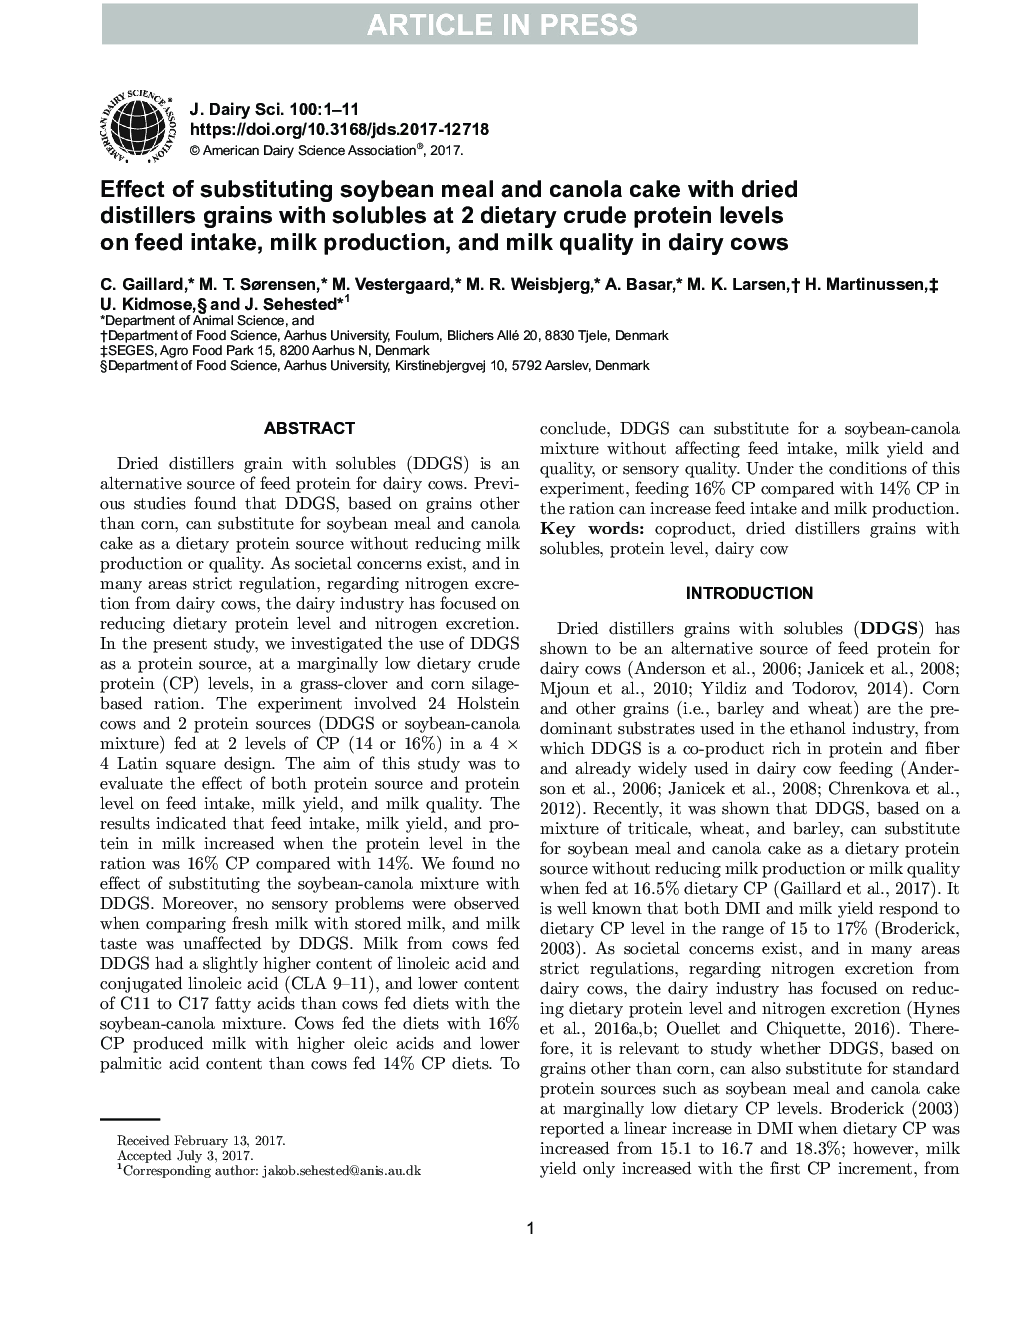 Effect of substituting soybean meal and canola cake with dried distillers grains with solubles at 2 dietary crude protein levels on feed intake, milk production, and milk quality in dairy cows